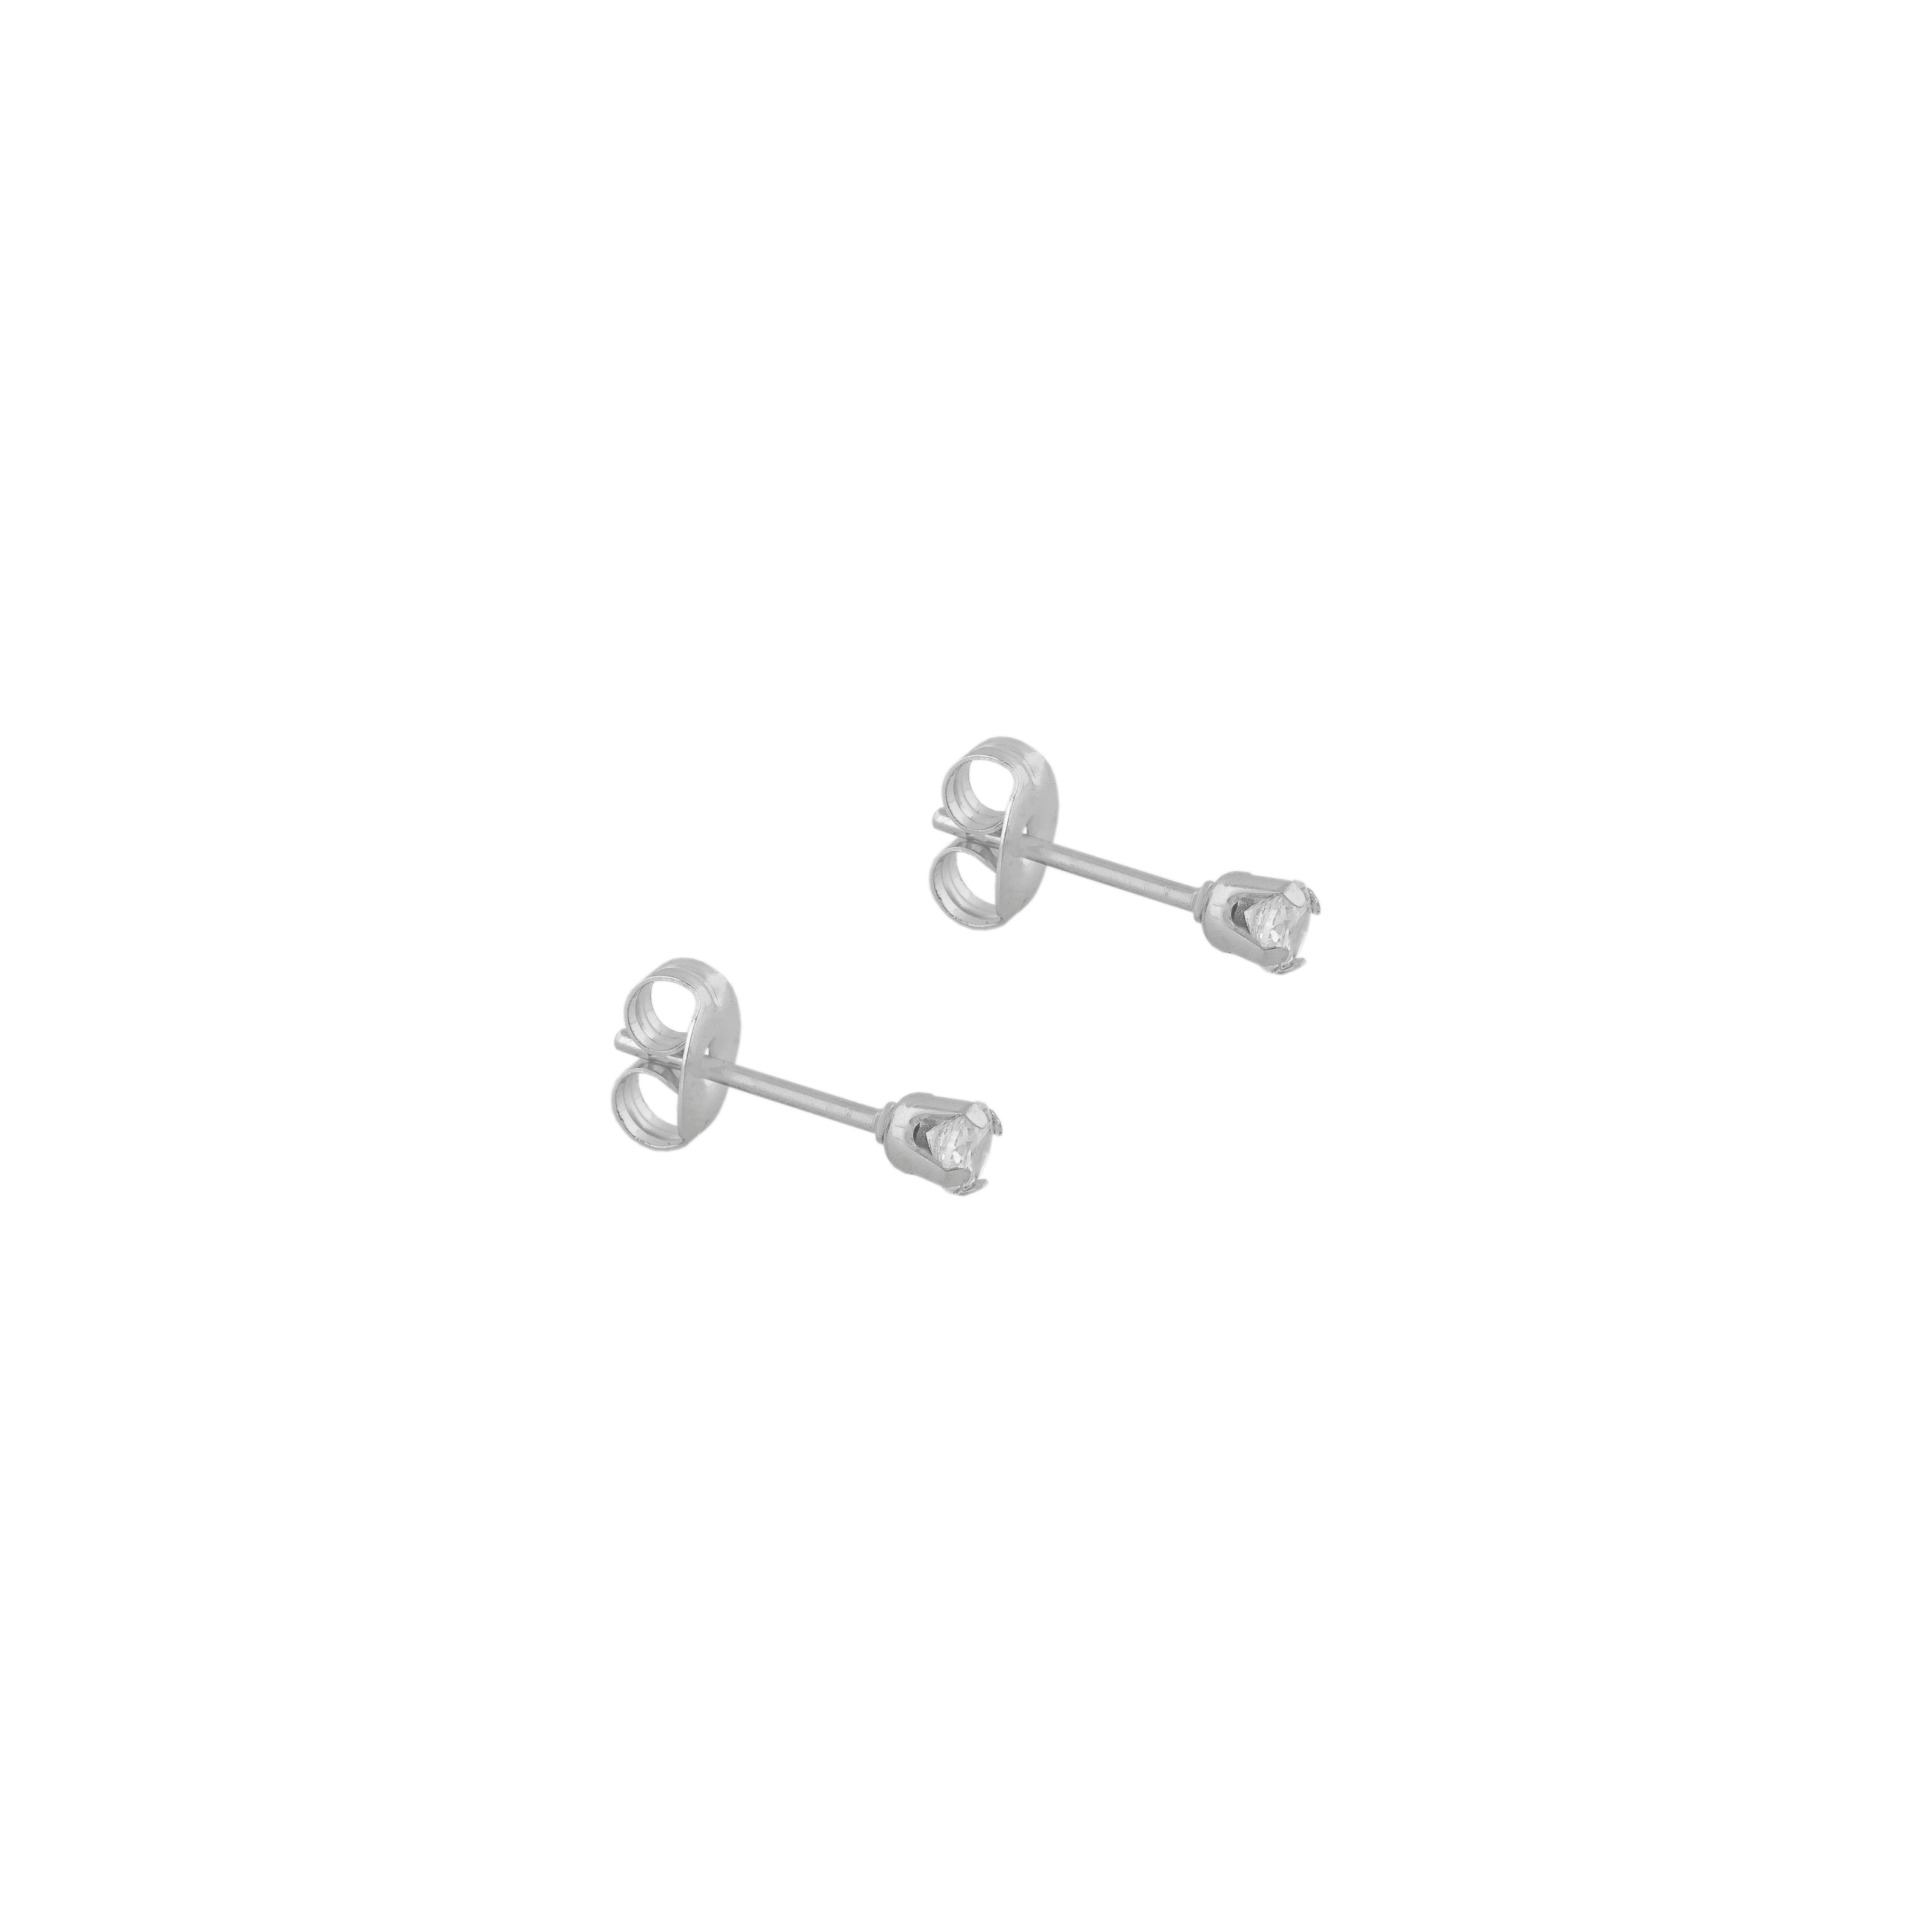 3MM Cubic Zirconia Allergy free Stainless Steel Ear Studs | MADE IN USA | Ideal for everyday wear